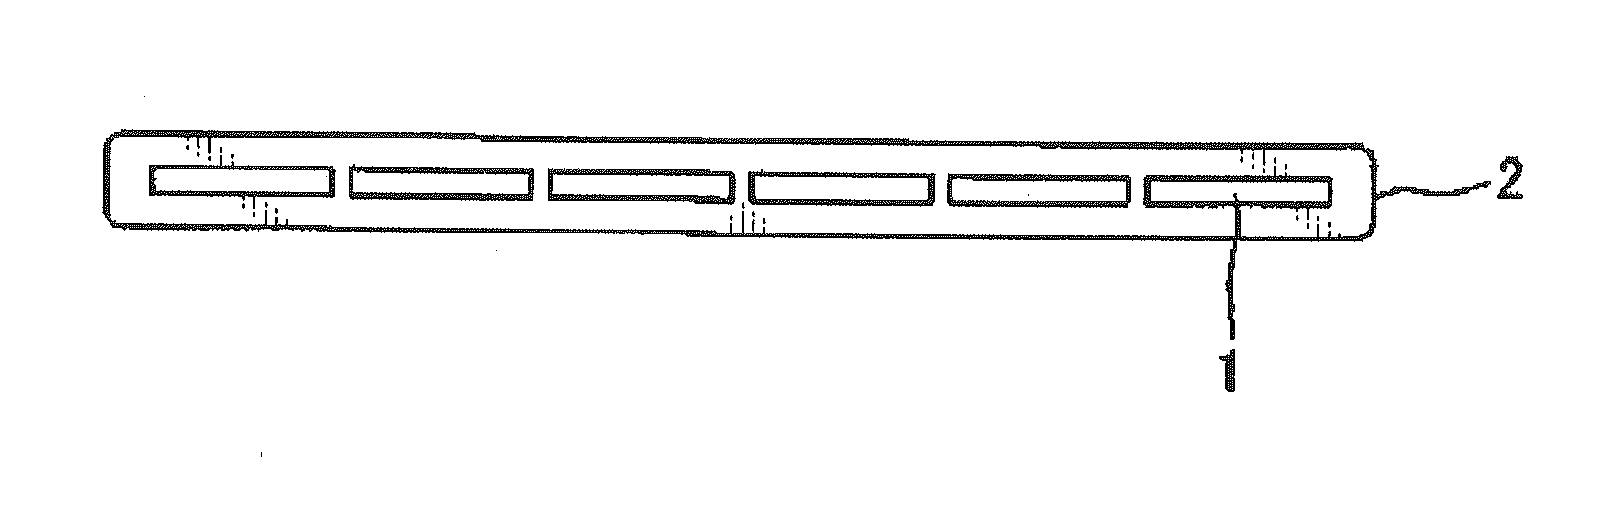 Flat cable and method for preparing the same